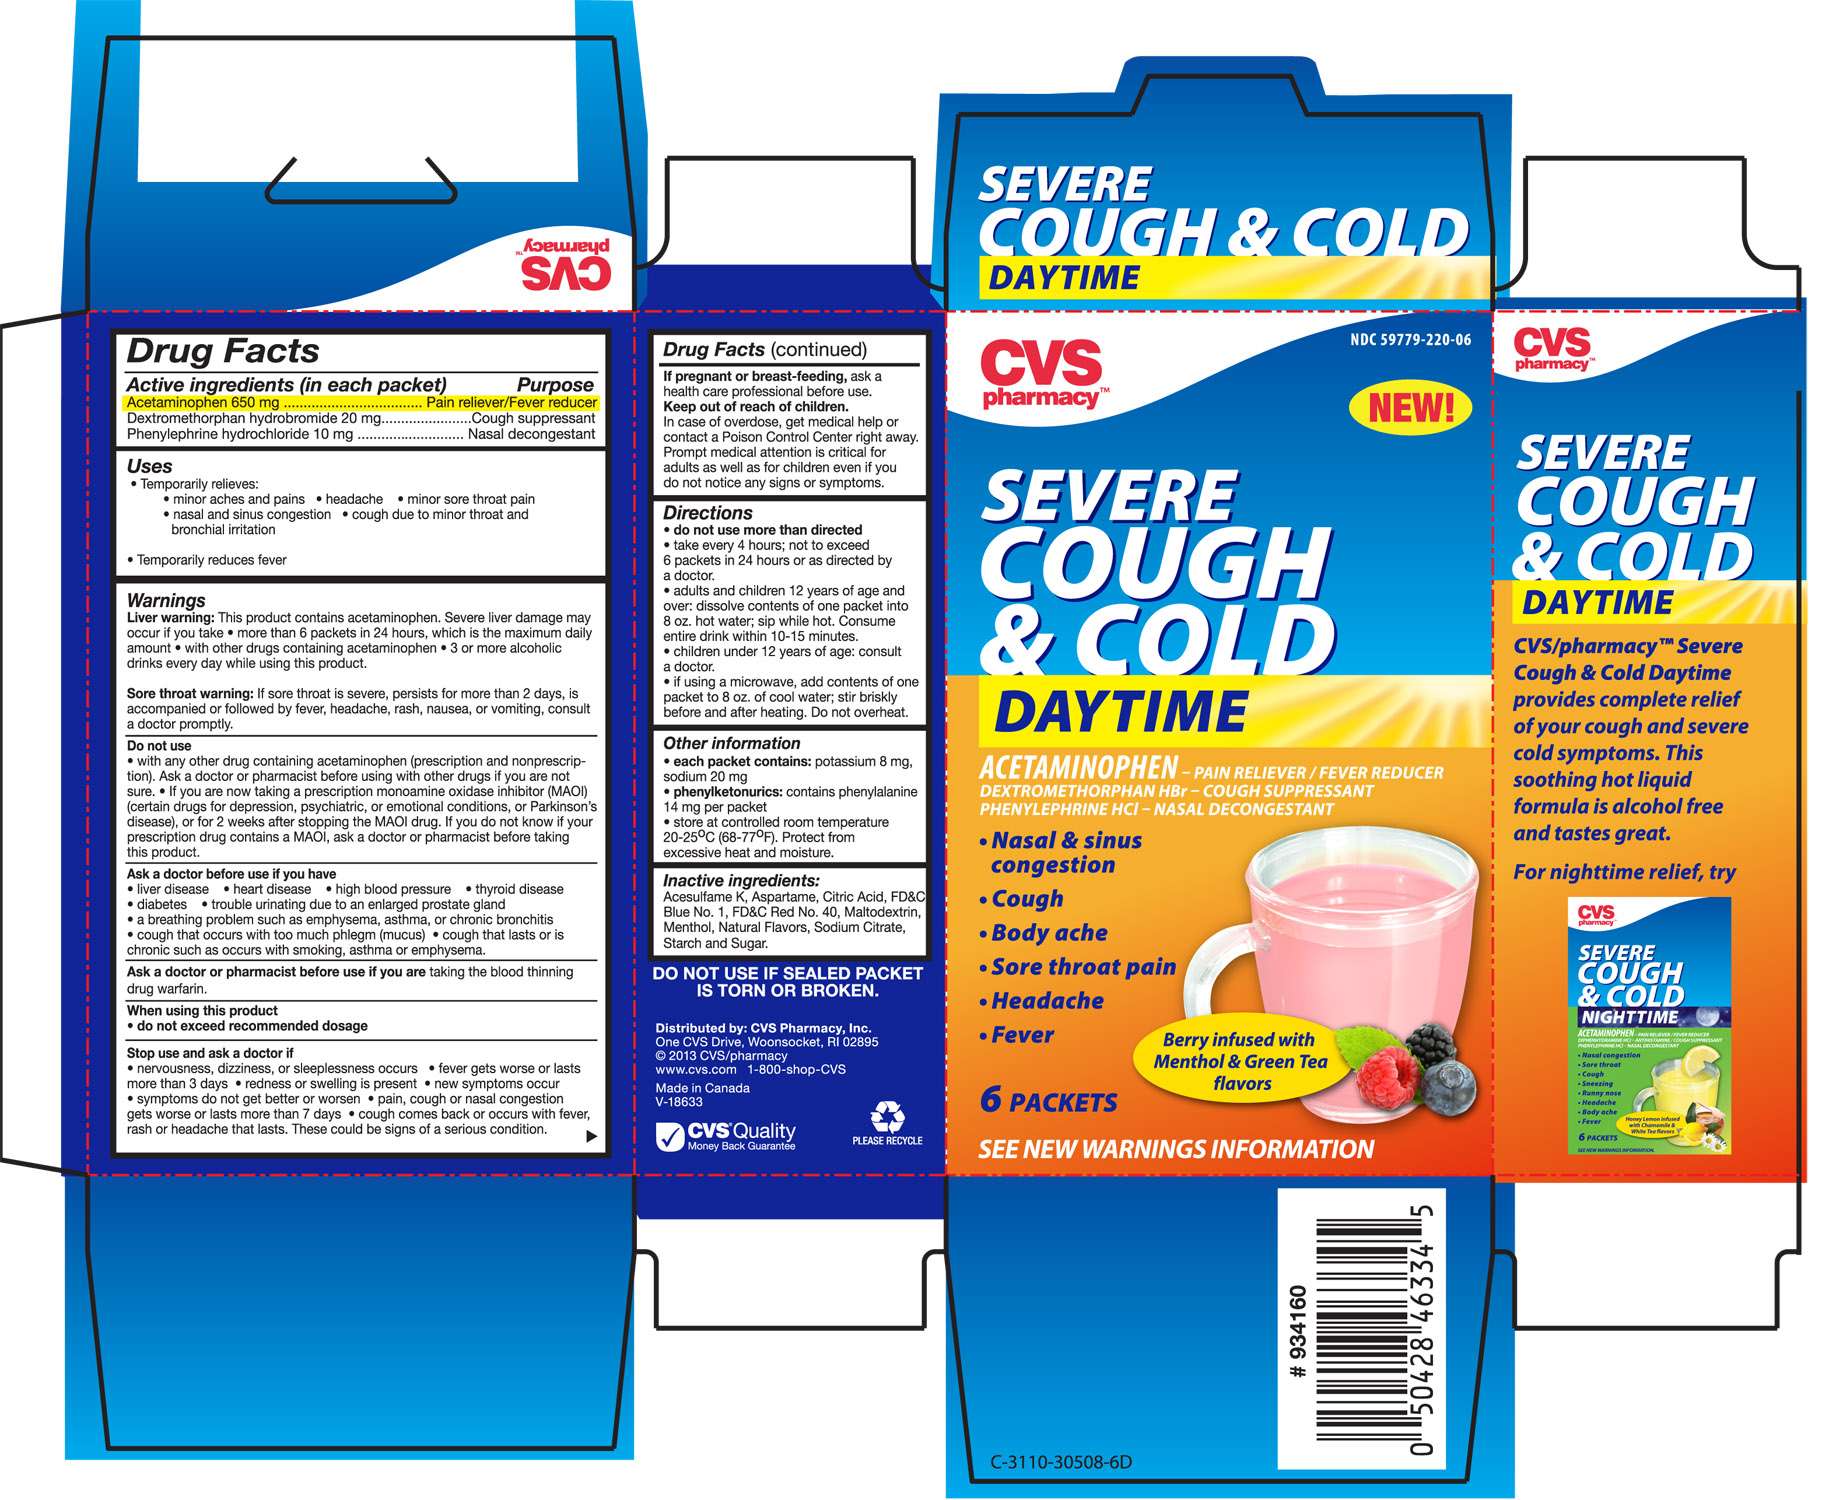 CVS Pharmacy Daytime Severe Cough and Cold